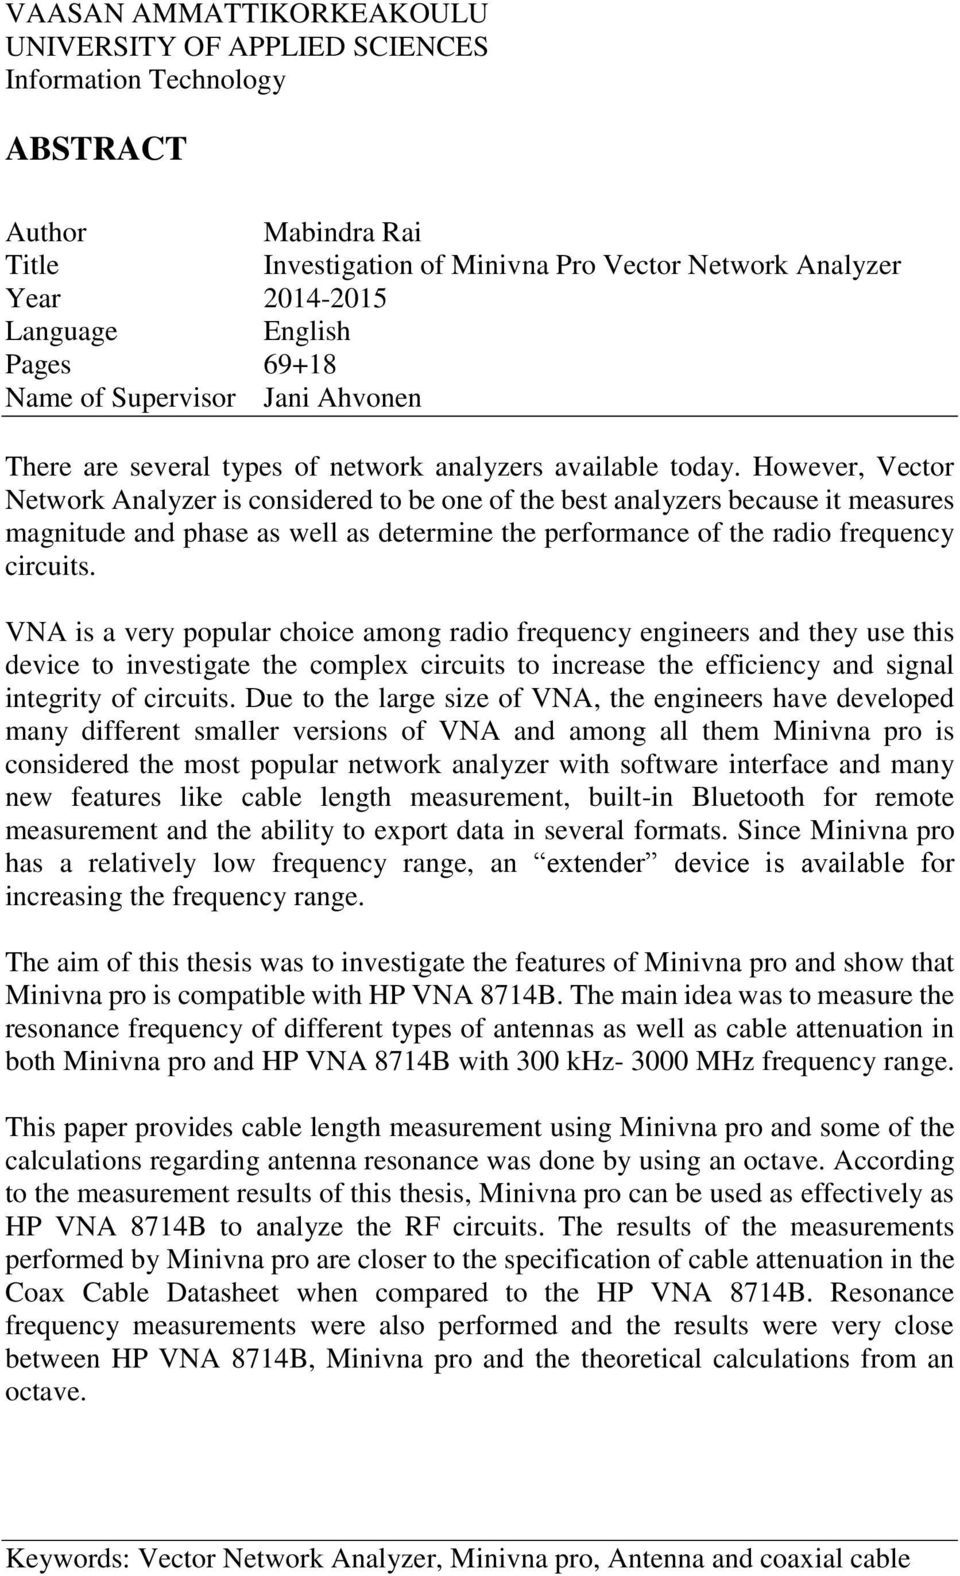 example abstract for thesis in information technology